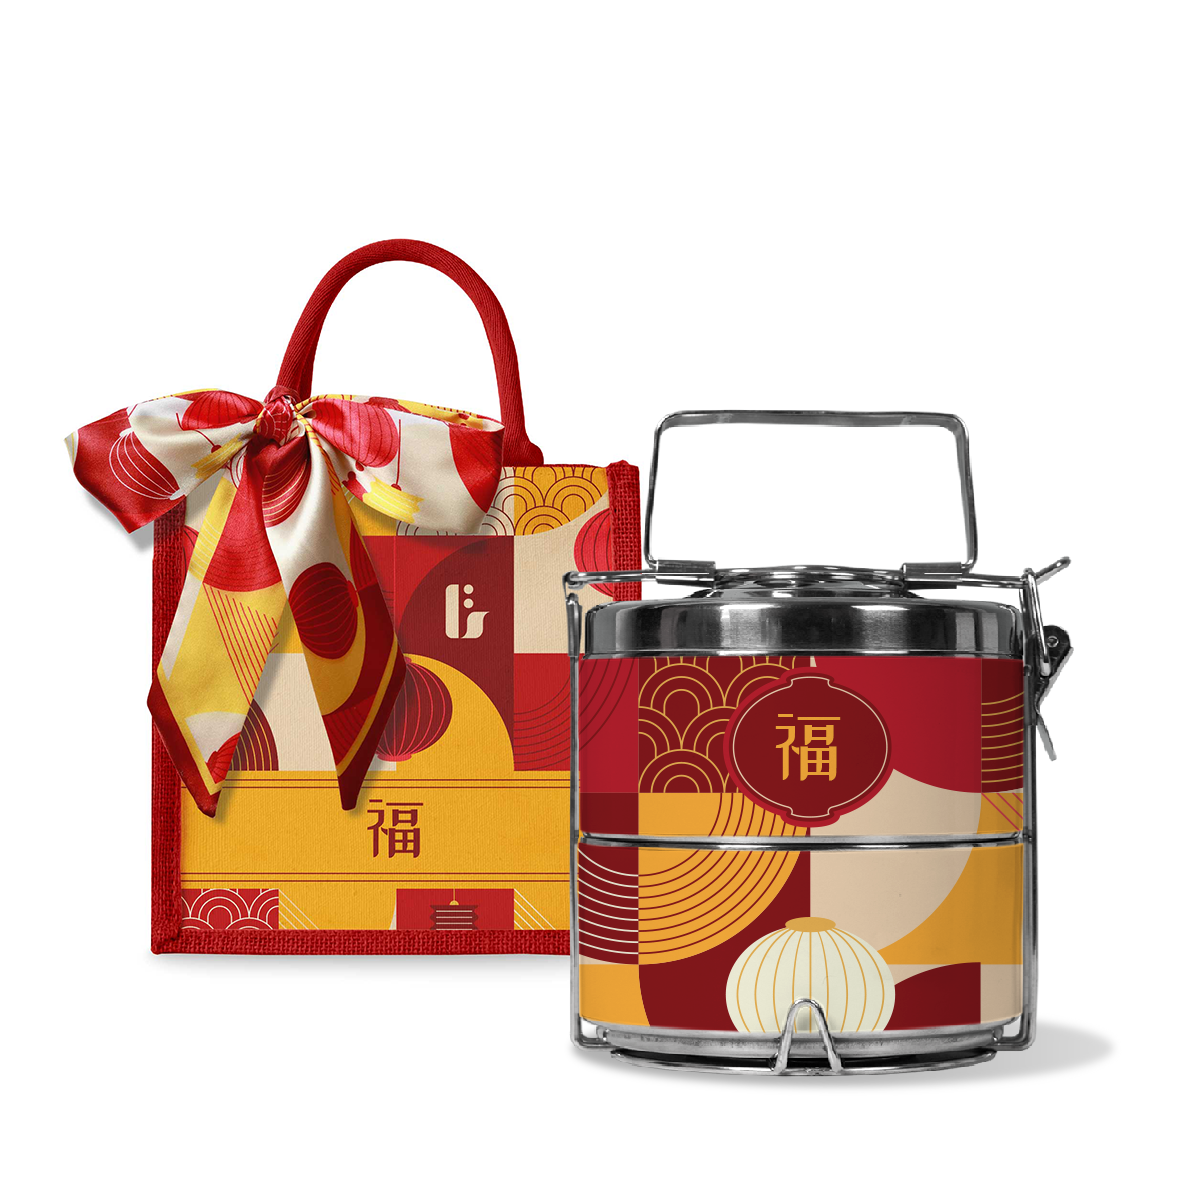 Lunar Blessing (Red Design) - Lunch Tote Bag with Two-Tier Tiffin Carrier